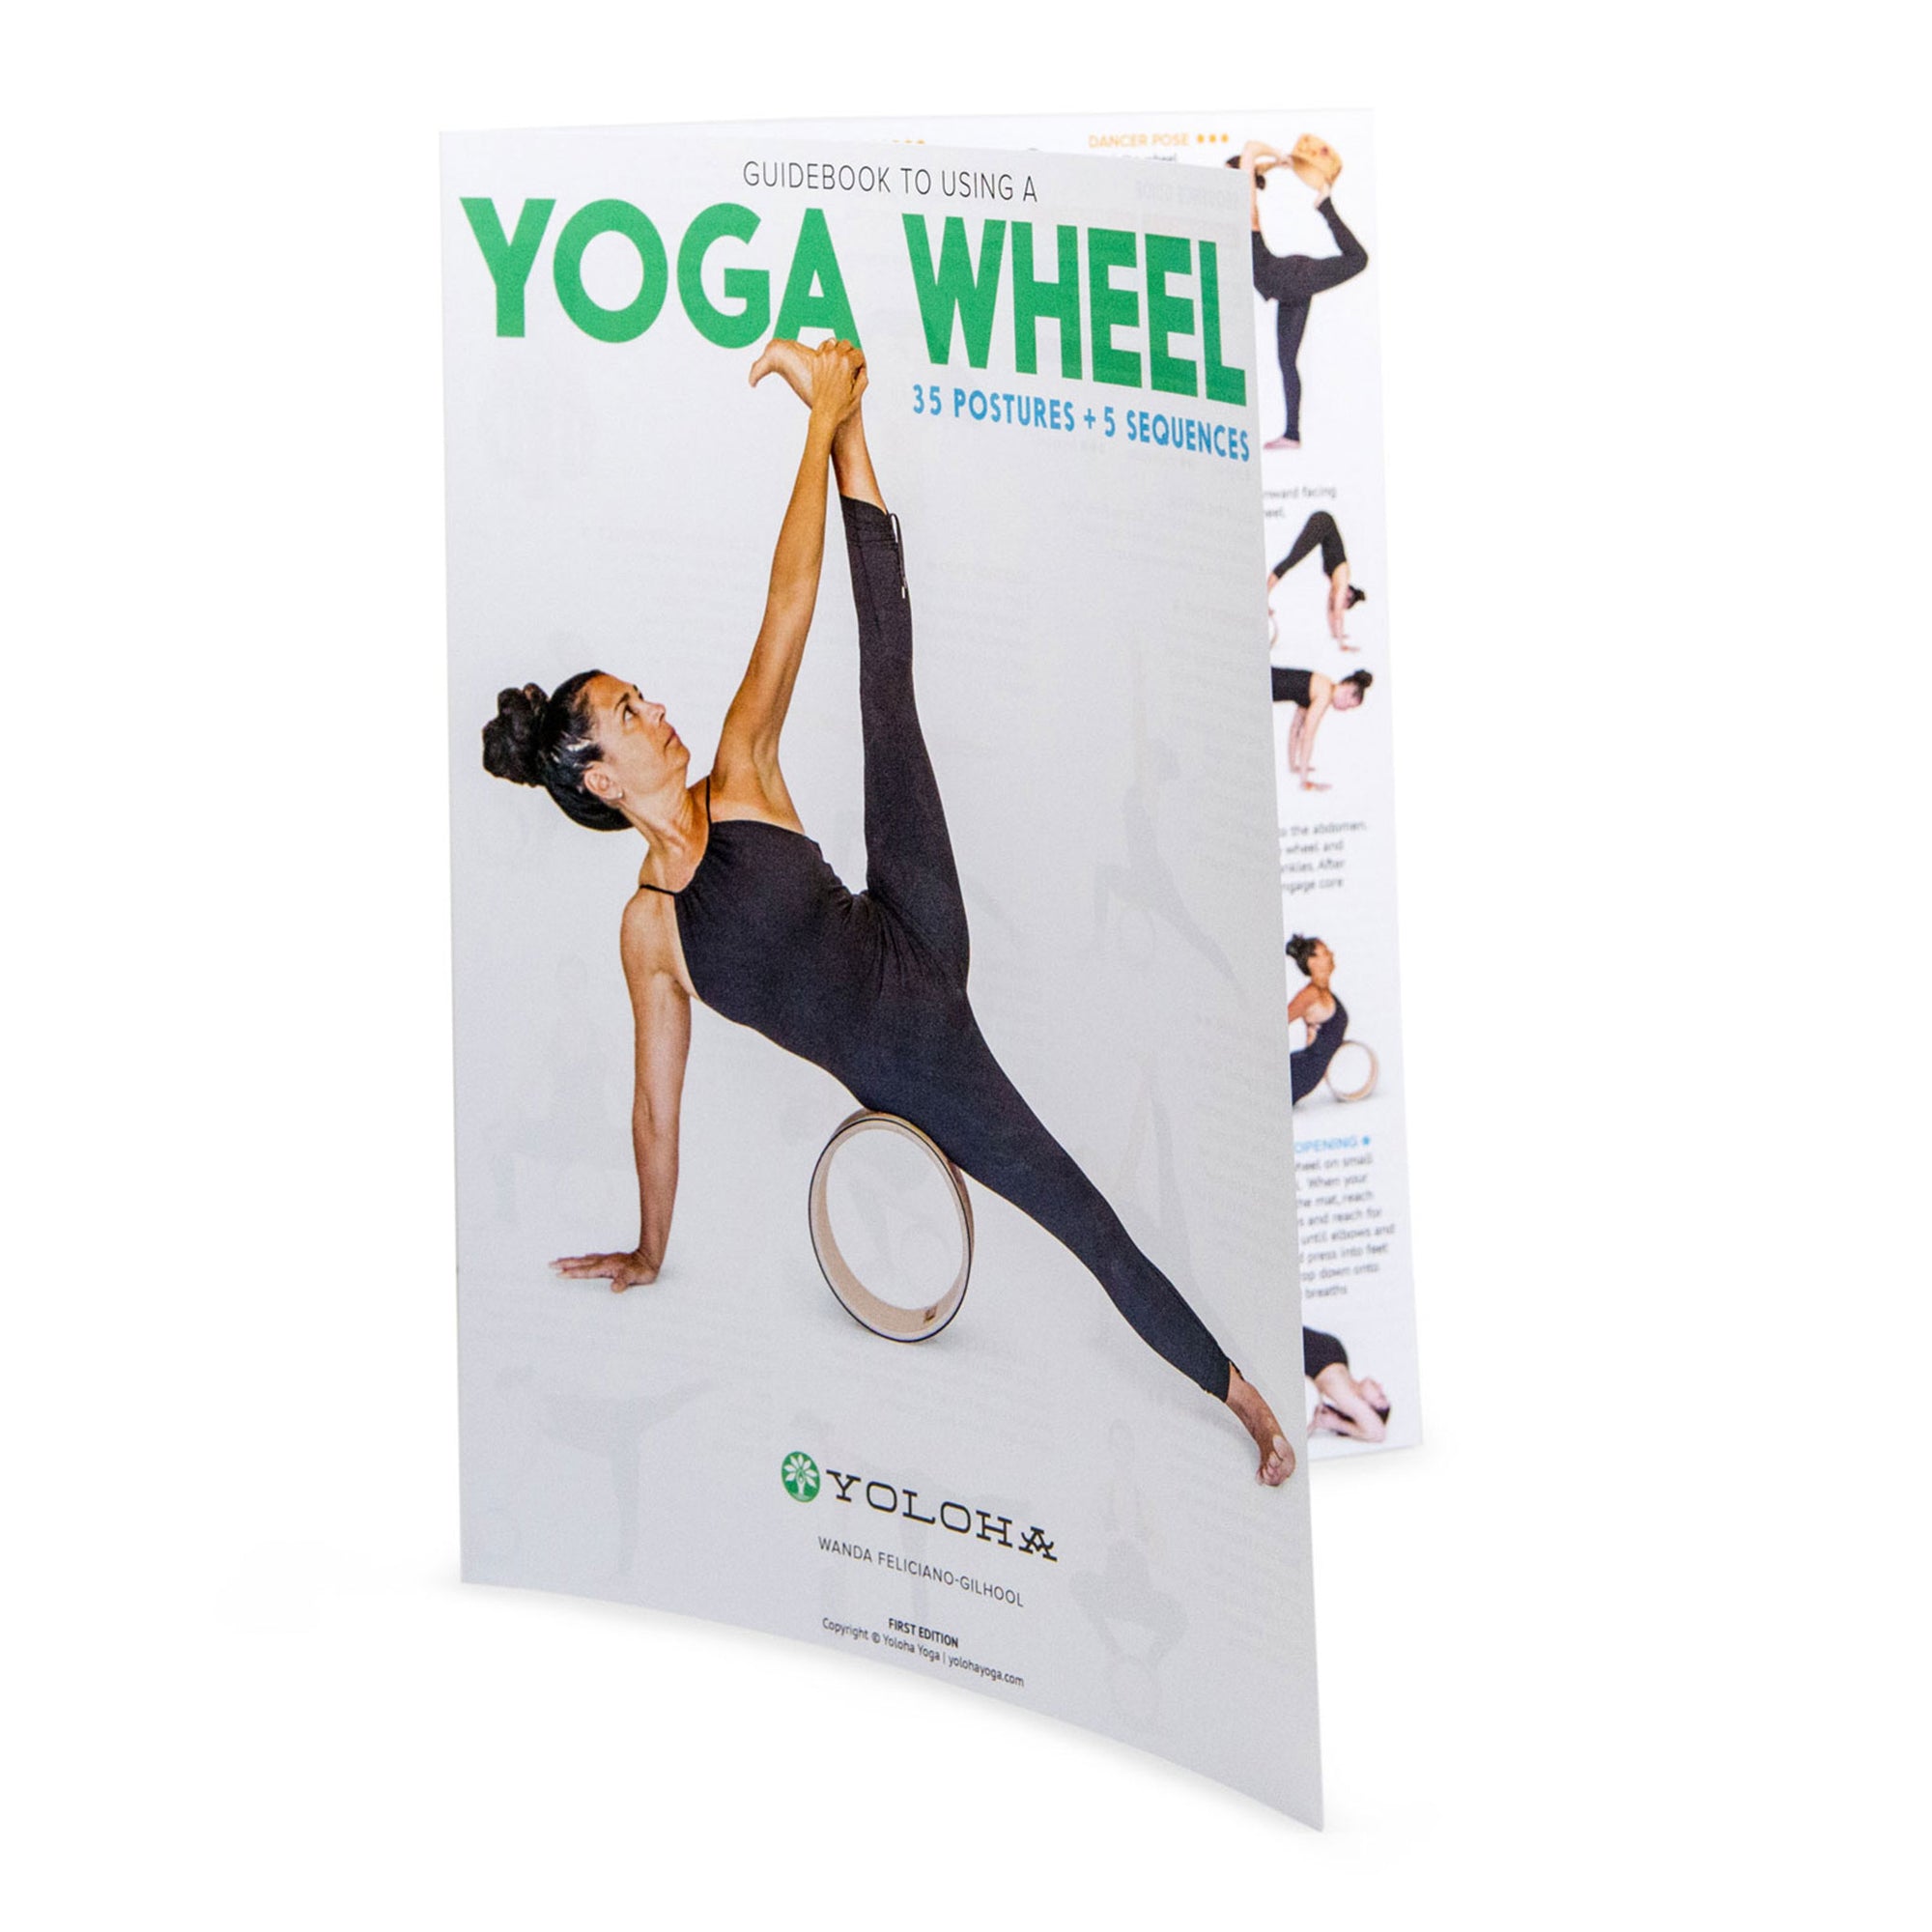 New Prop on the Block: 5 Things to Know About the Yoga Wheel